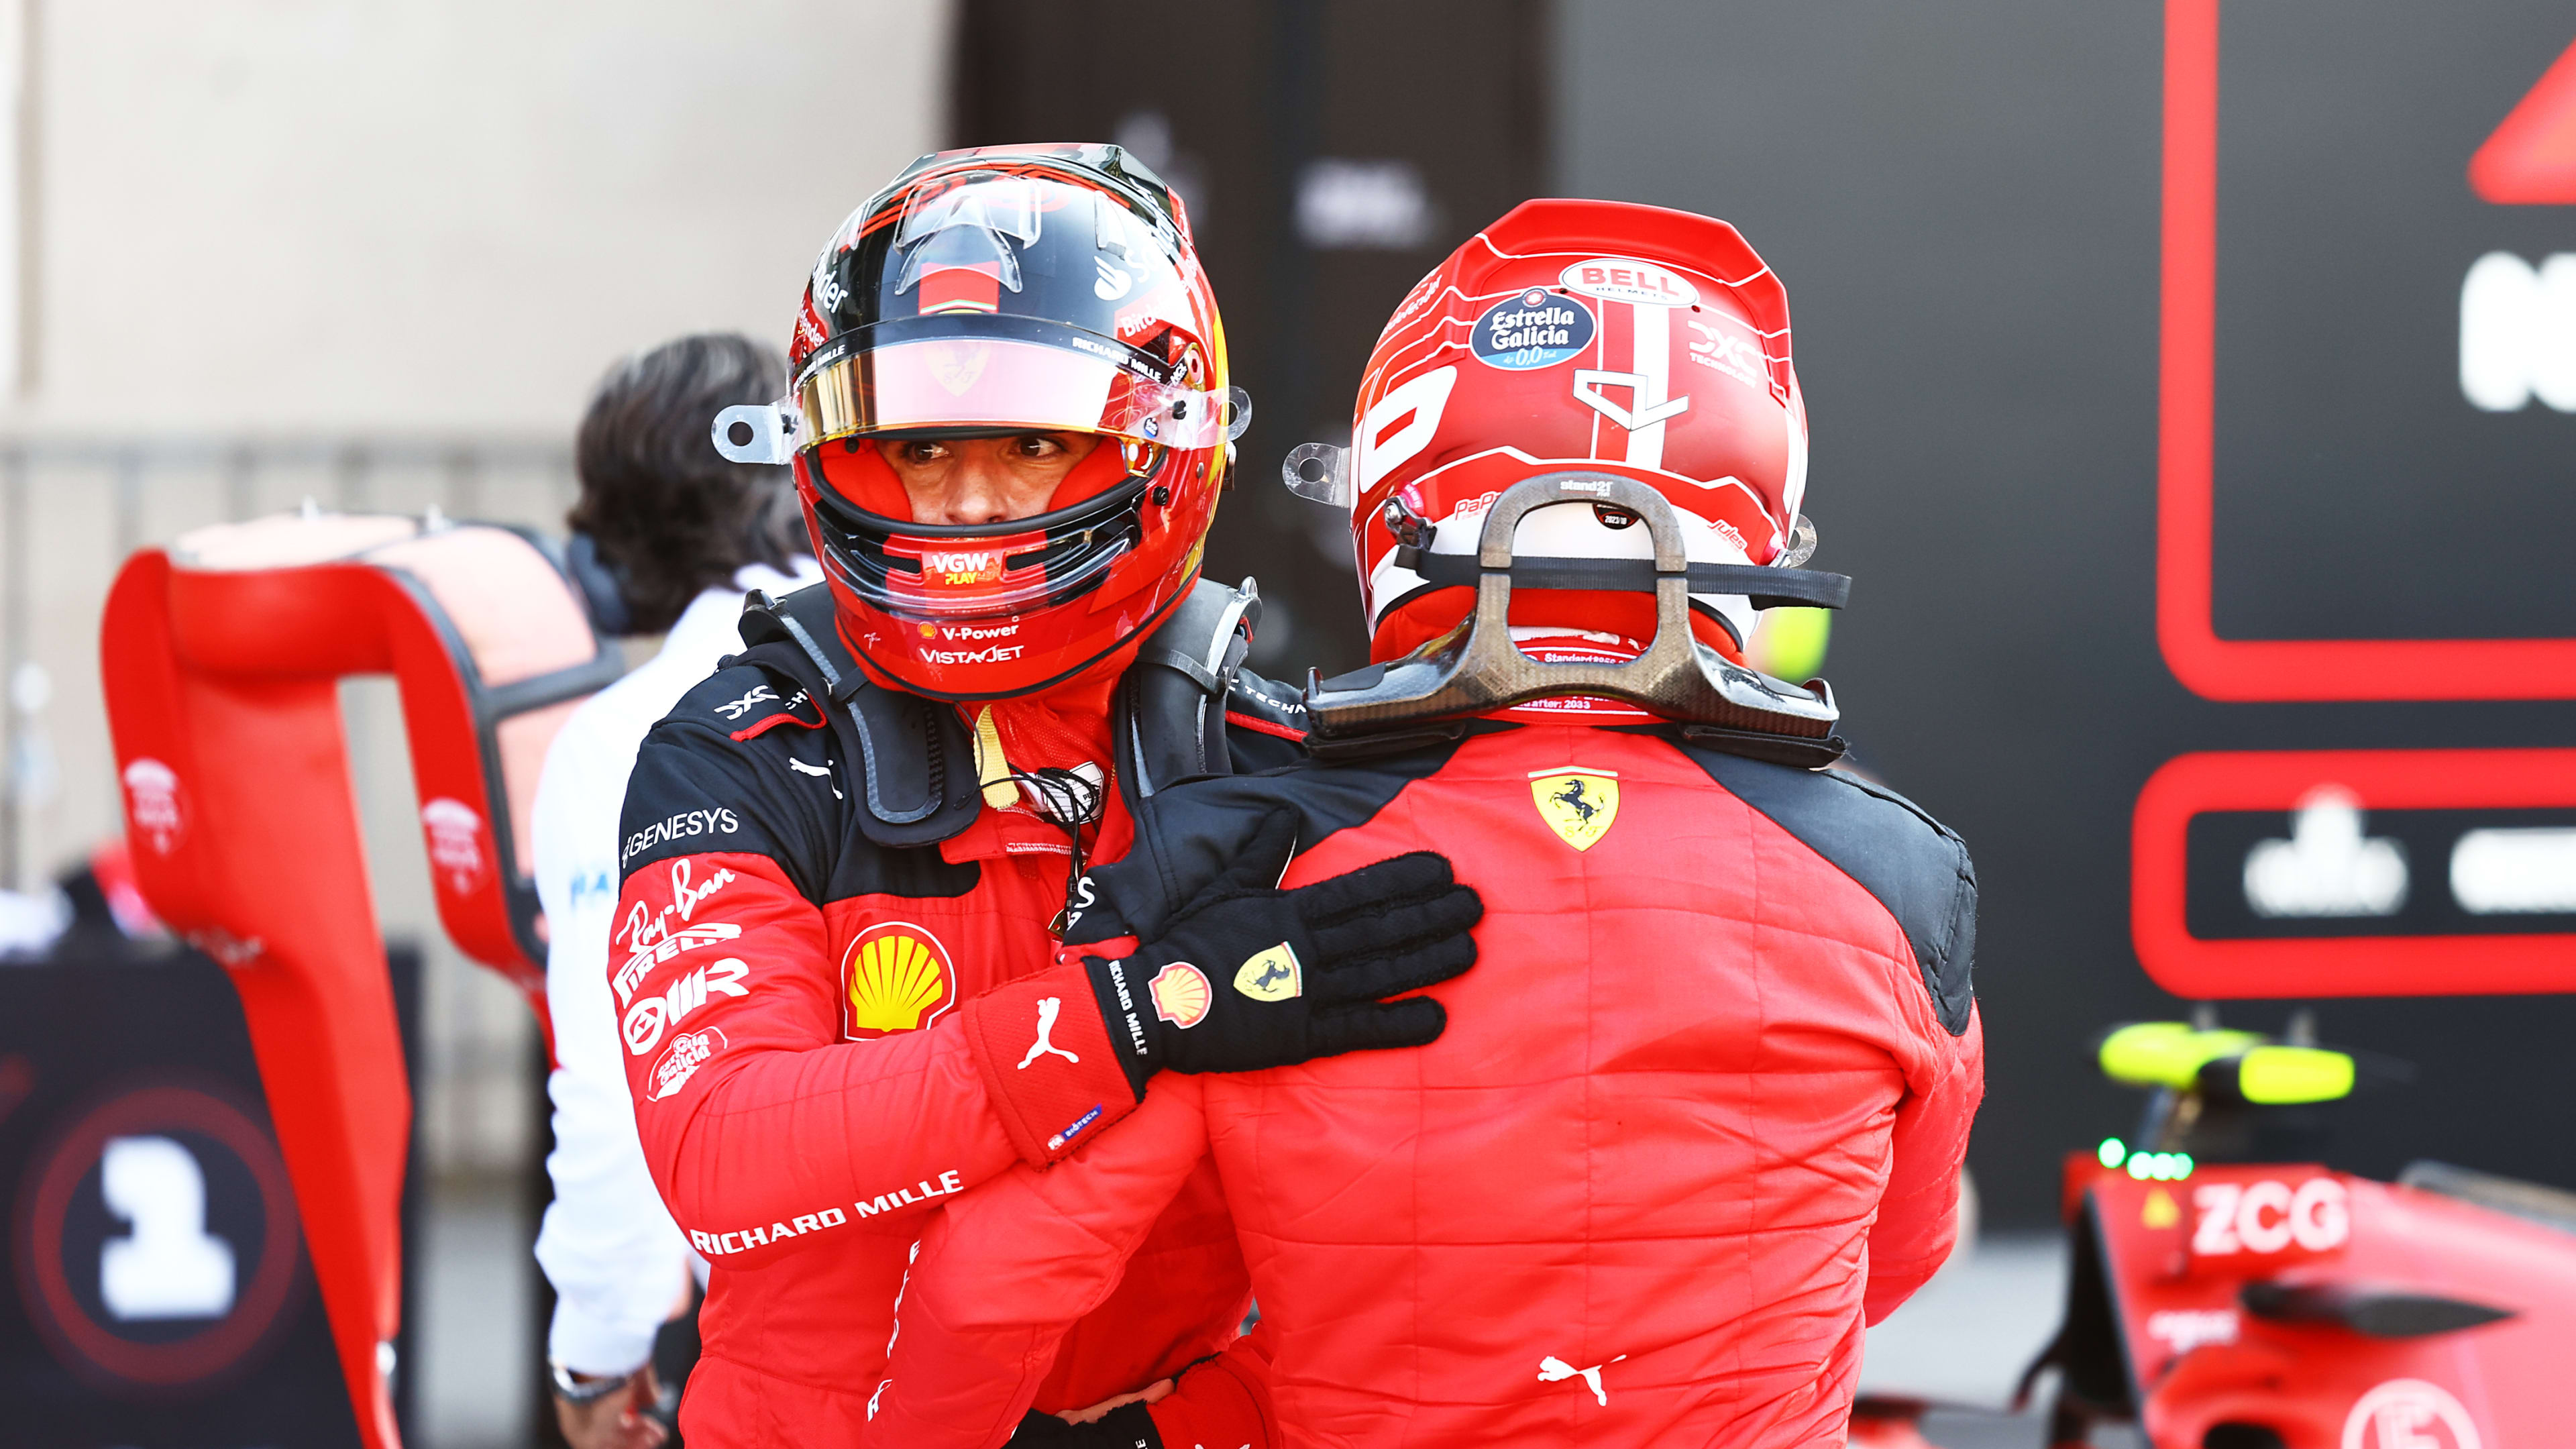 It was a very strange one' – Charles Leclerc and Carlos Sainz both